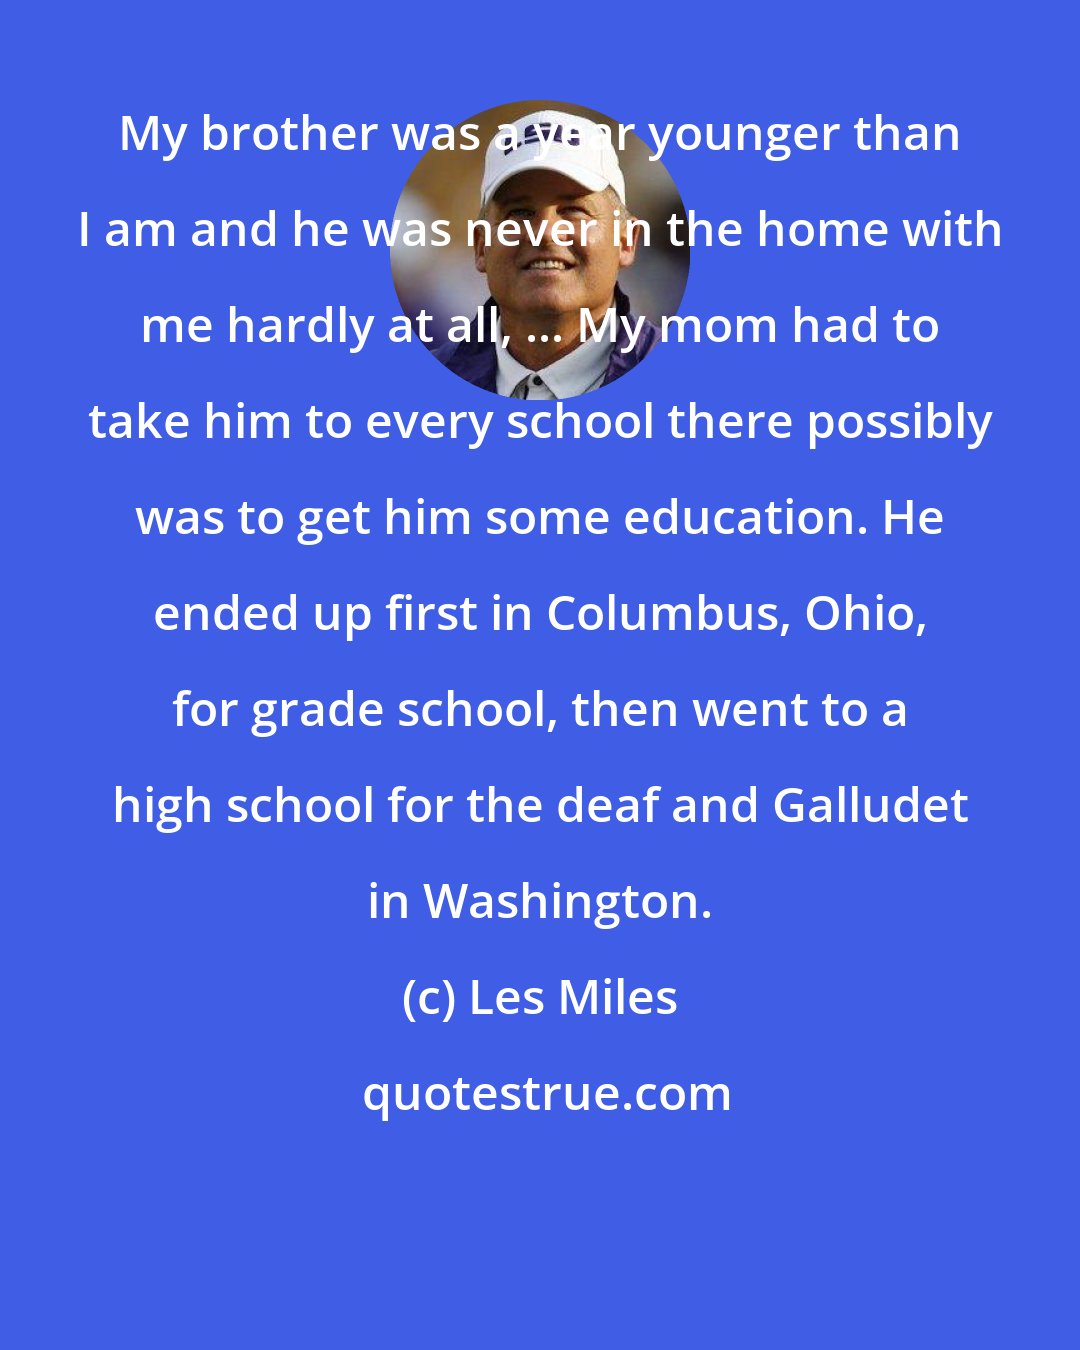 Les Miles: My brother was a year younger than I am and he was never in the home with me hardly at all, ... My mom had to take him to every school there possibly was to get him some education. He ended up first in Columbus, Ohio, for grade school, then went to a high school for the deaf and Galludet in Washington.